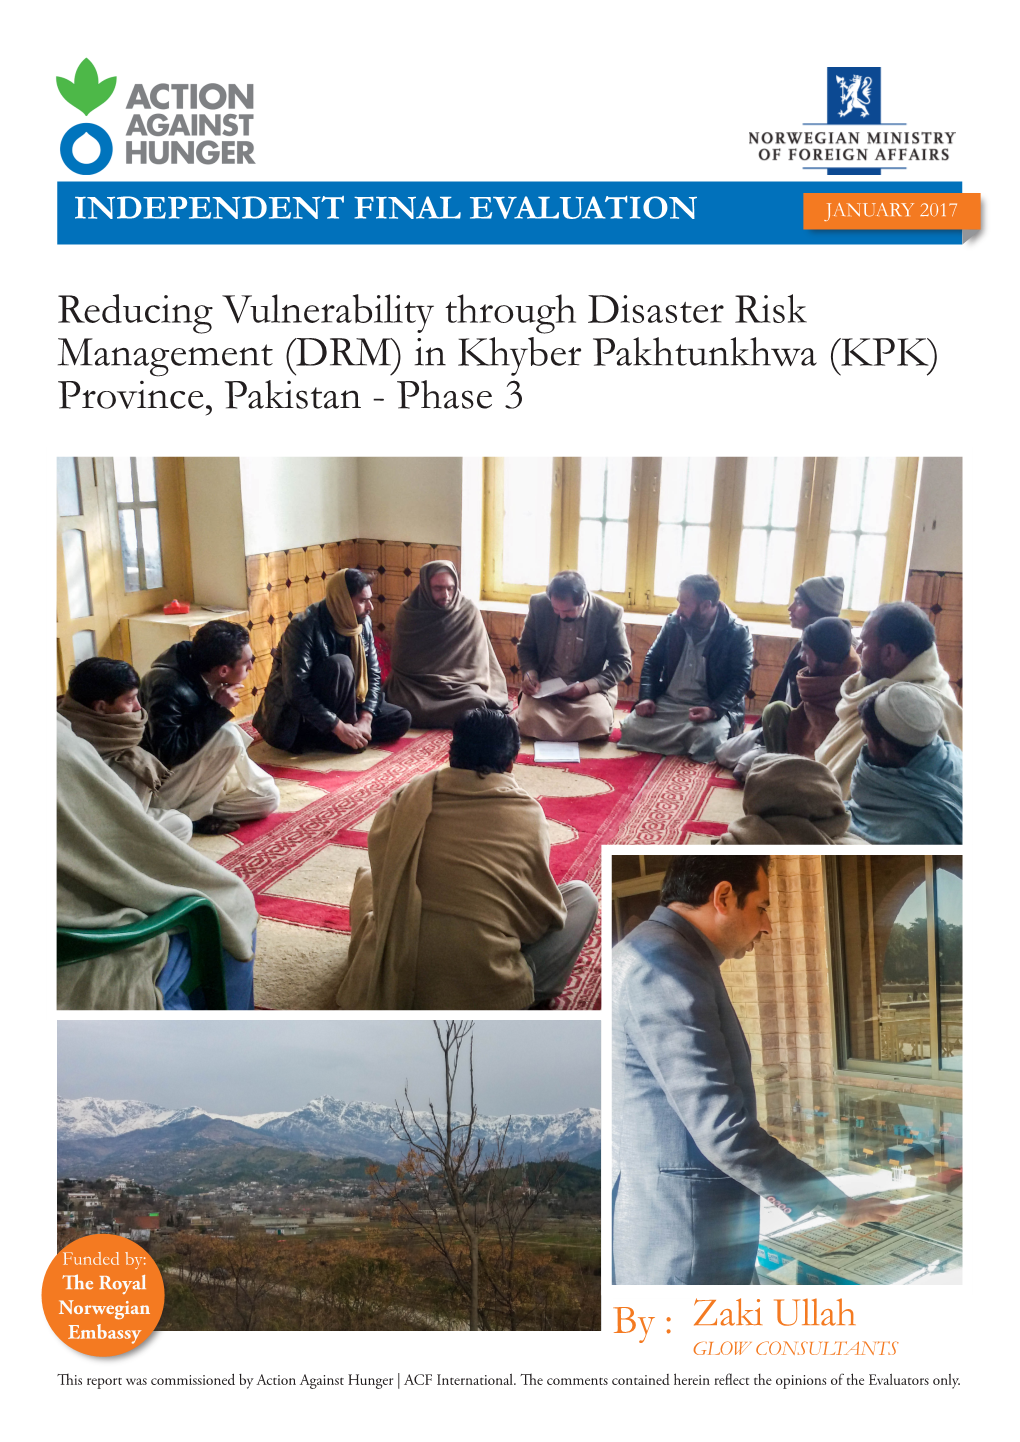 Reducing Vulnerability Through Disaster Risk Management (DRM) in Khyber Pakhtunkhwa (KPK) Province, Pakistan - Phase 3